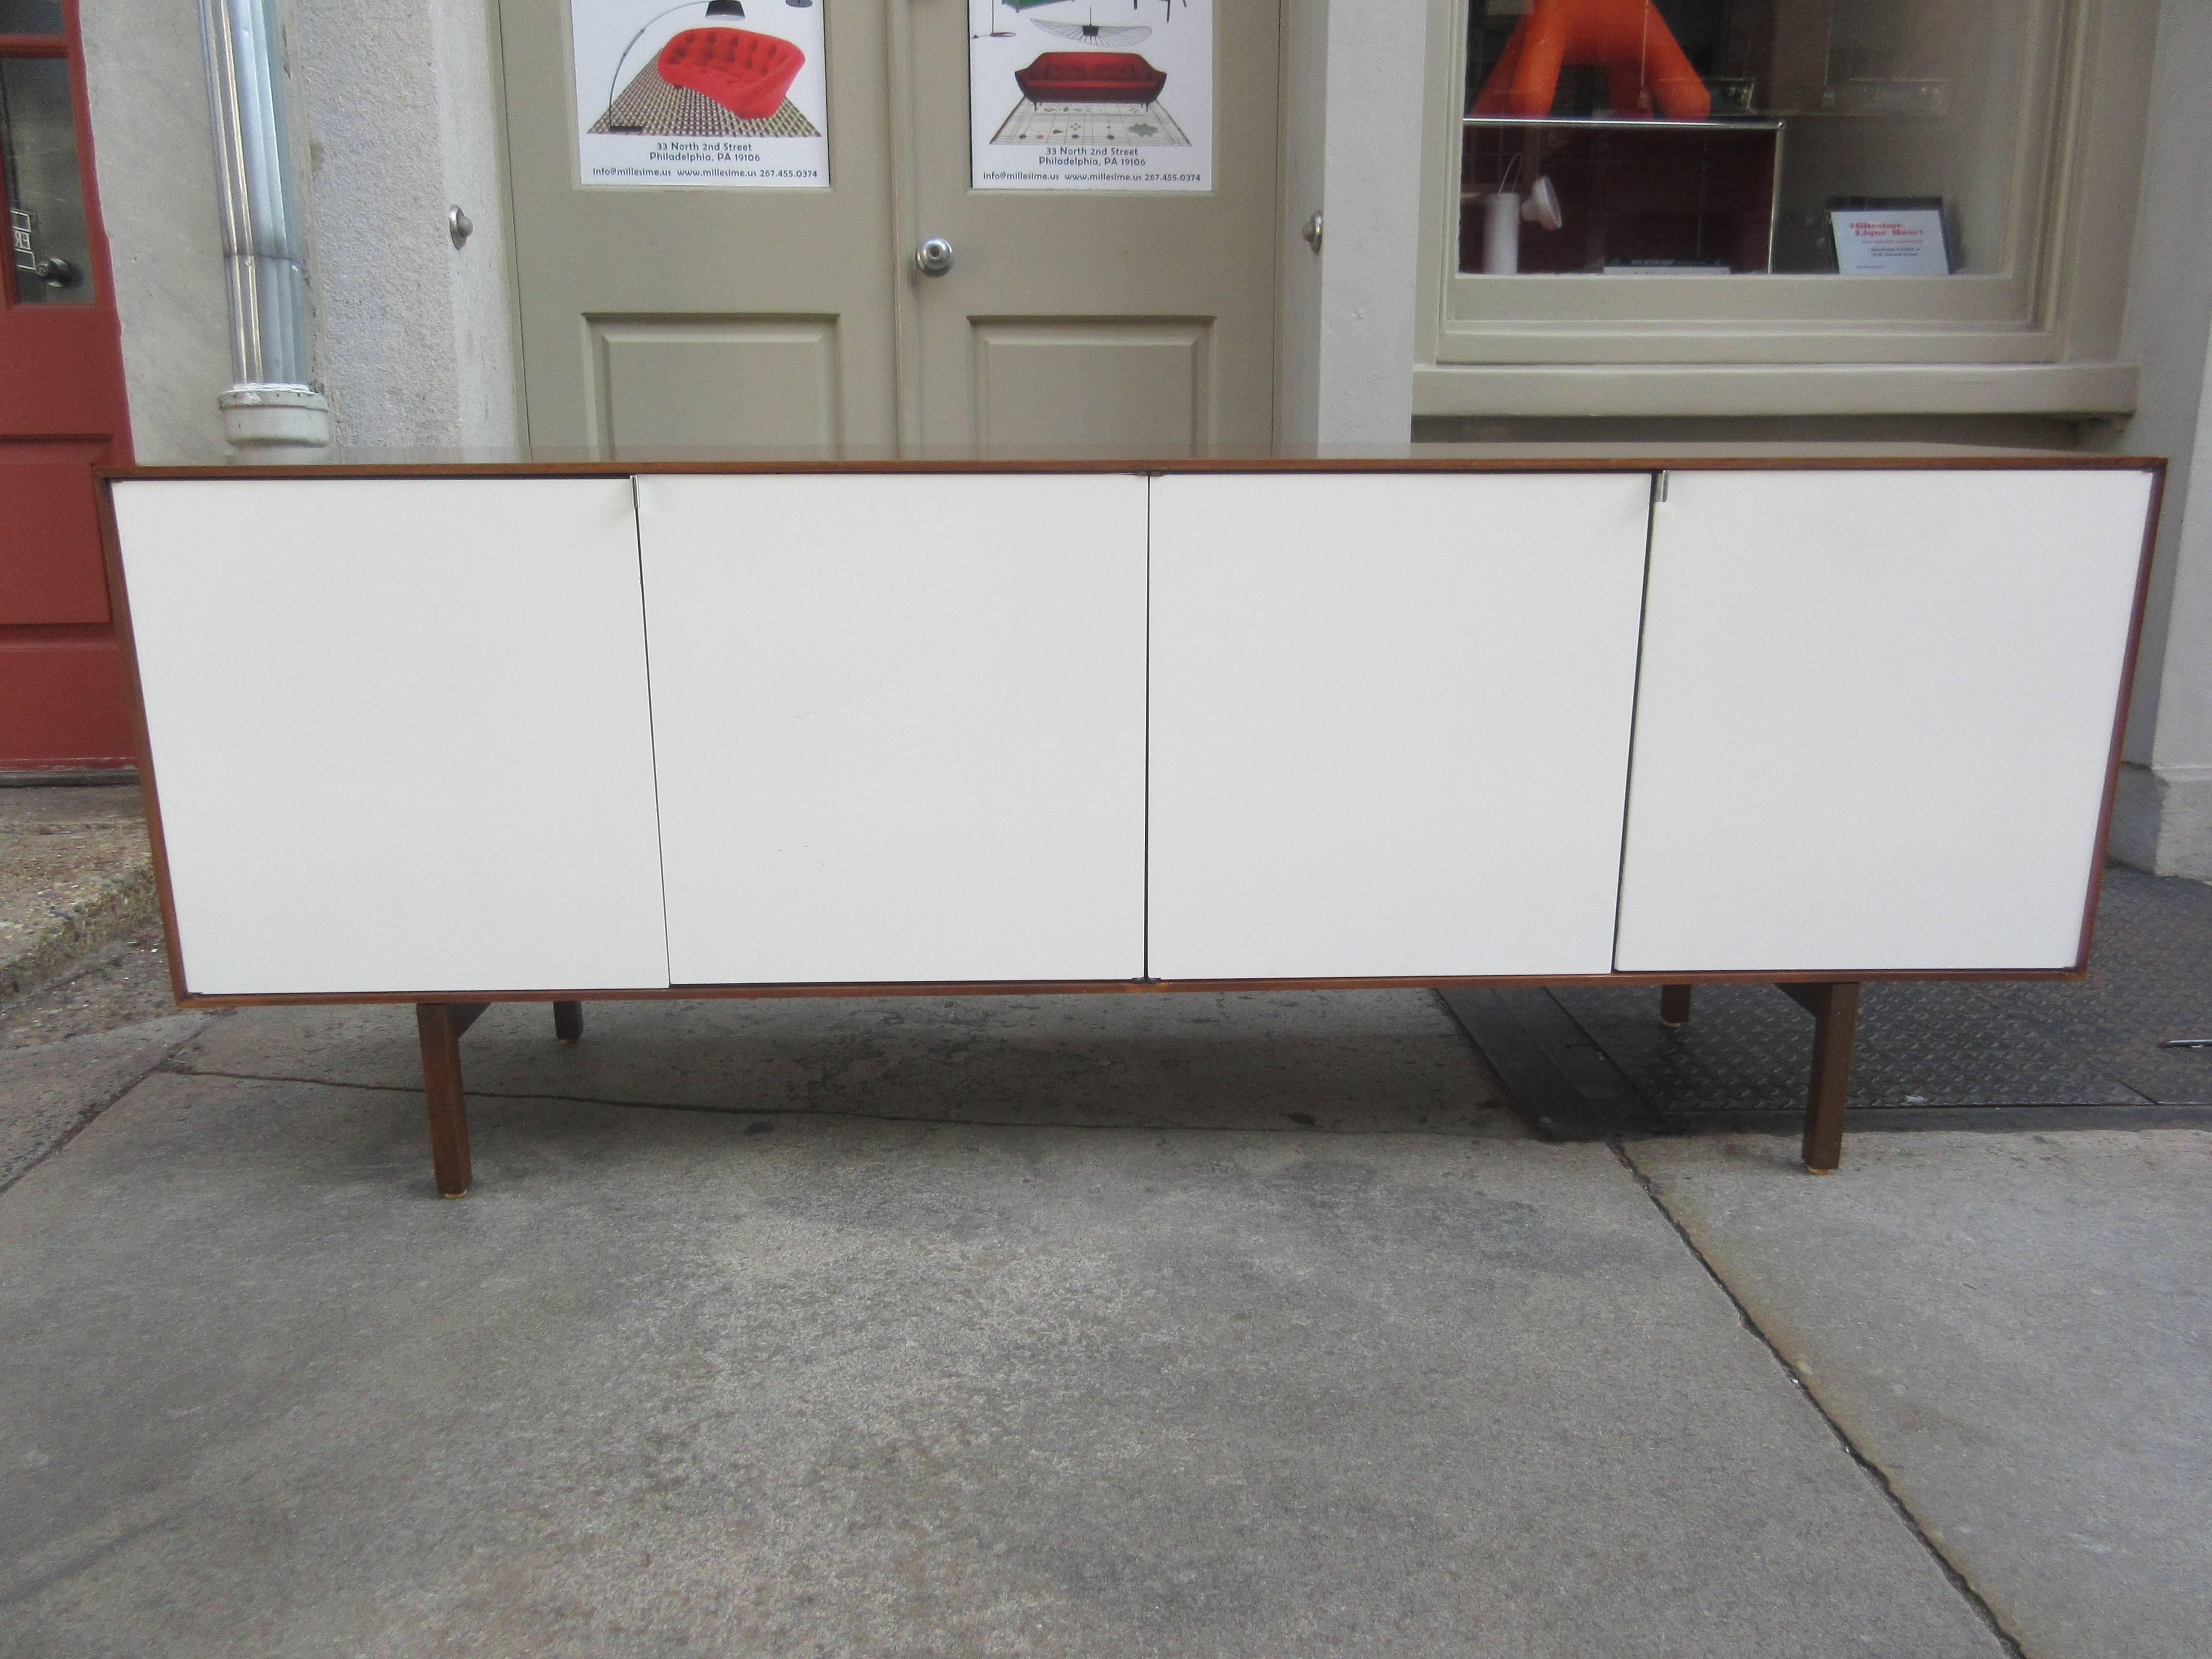 Lacquer fronted doors in cream give a lightness to this large credenza. Legs have beautiful mortised joints and interior reveals storage of adjustable shelves and drawers. Legs and cabinet are of walnut with chromed finger pulls one two of the four